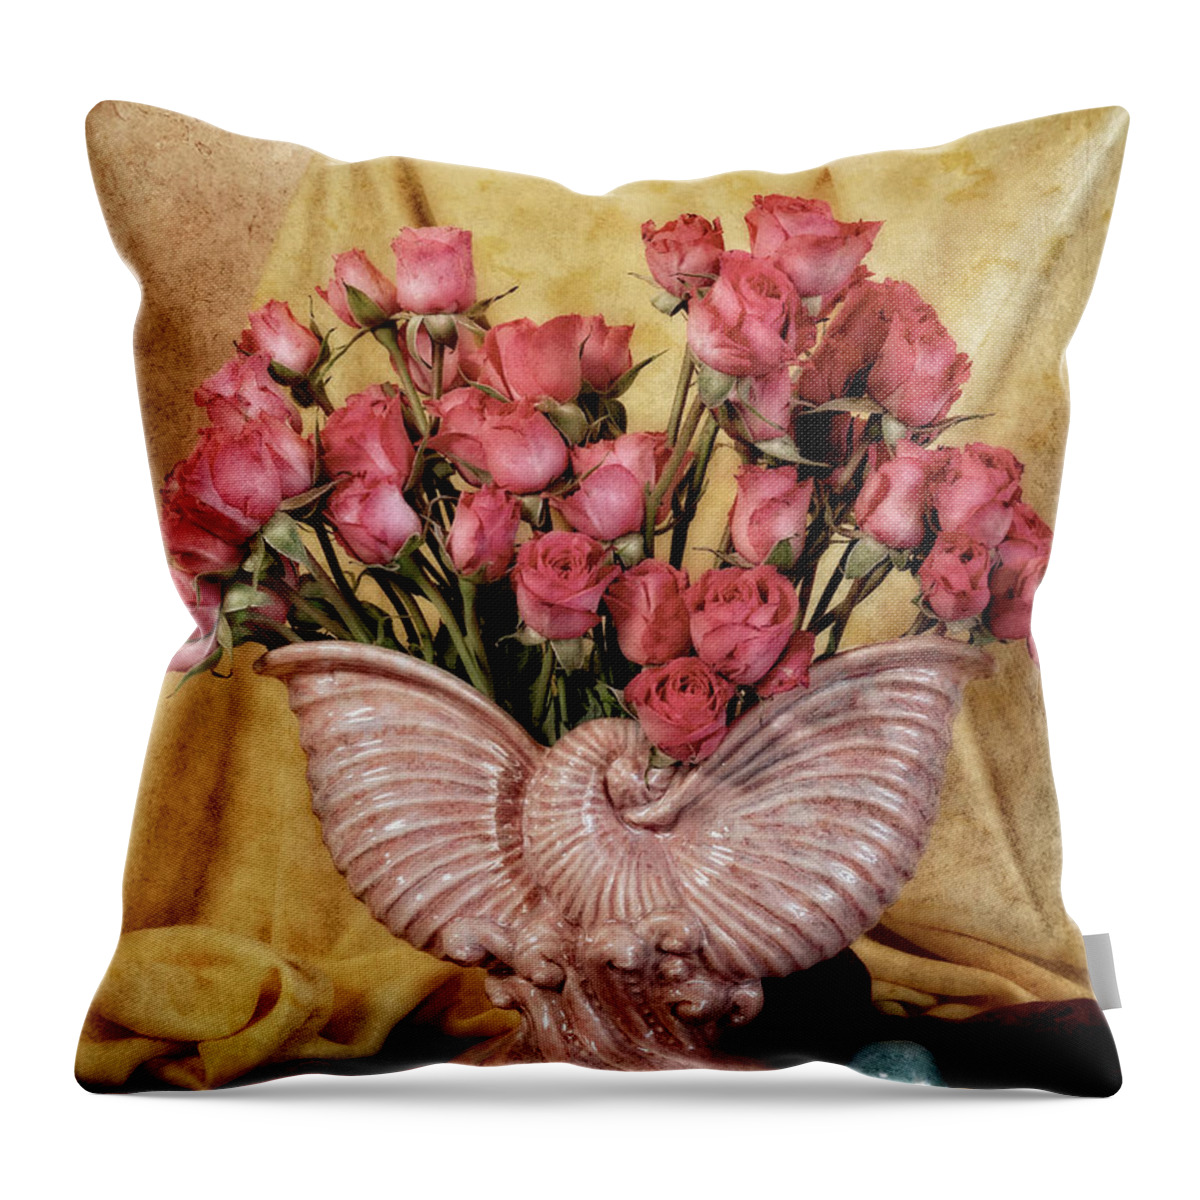 Pink Vase Throw Pillow featuring the photograph Roses in Pink Vintage Vase by Sandra Selle Rodriguez